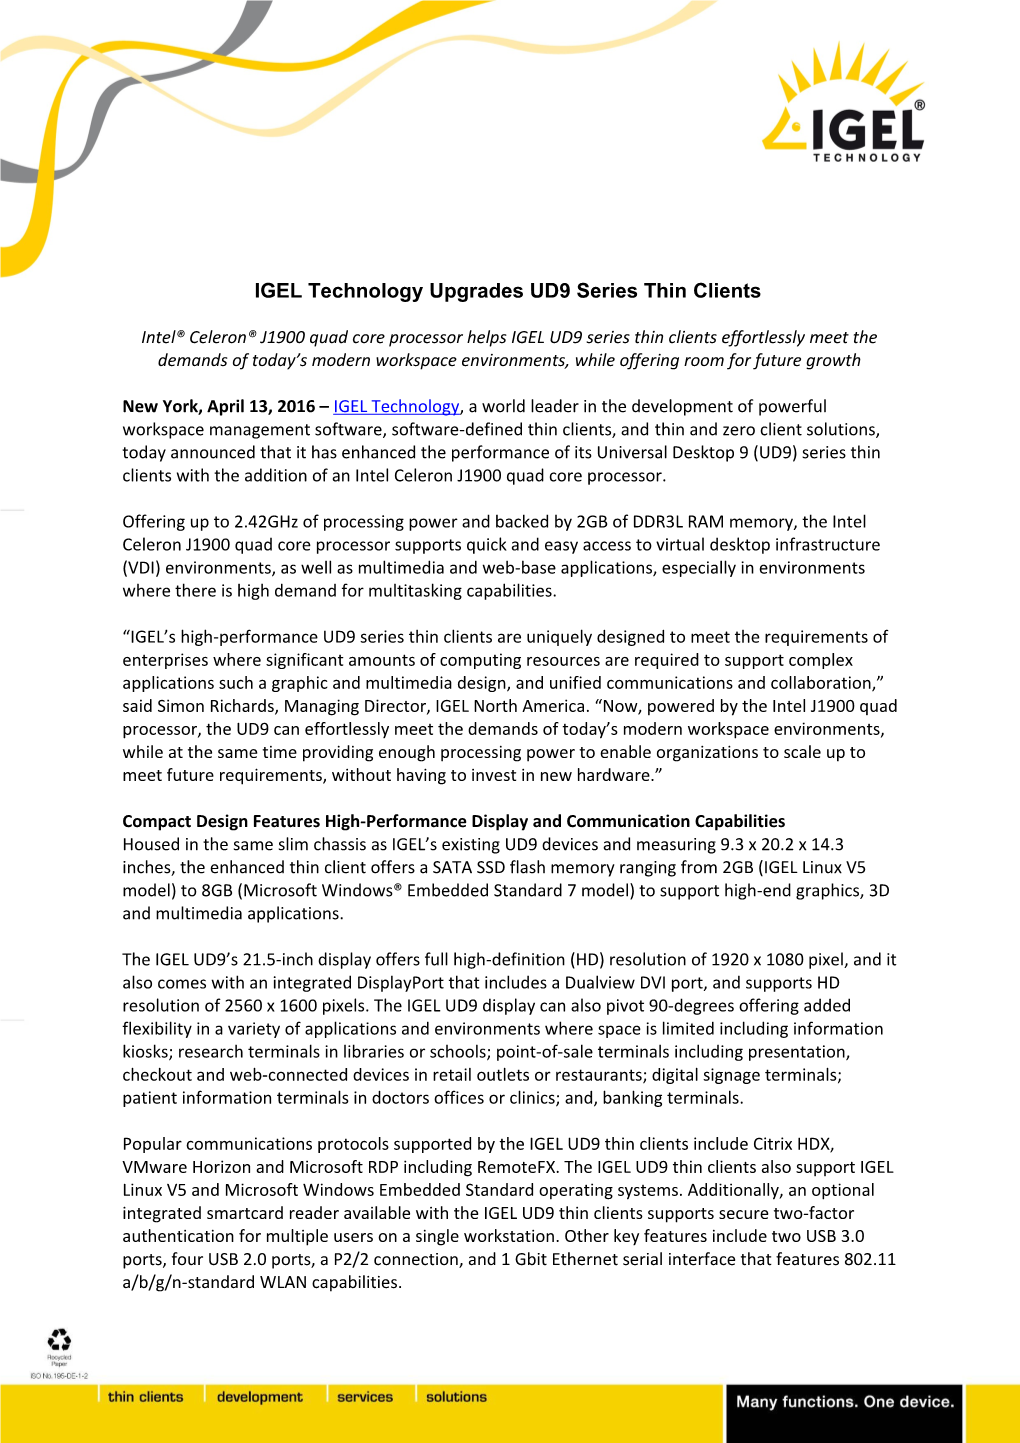 IGEL Technology Upgrades UD9 Series Thin Clients